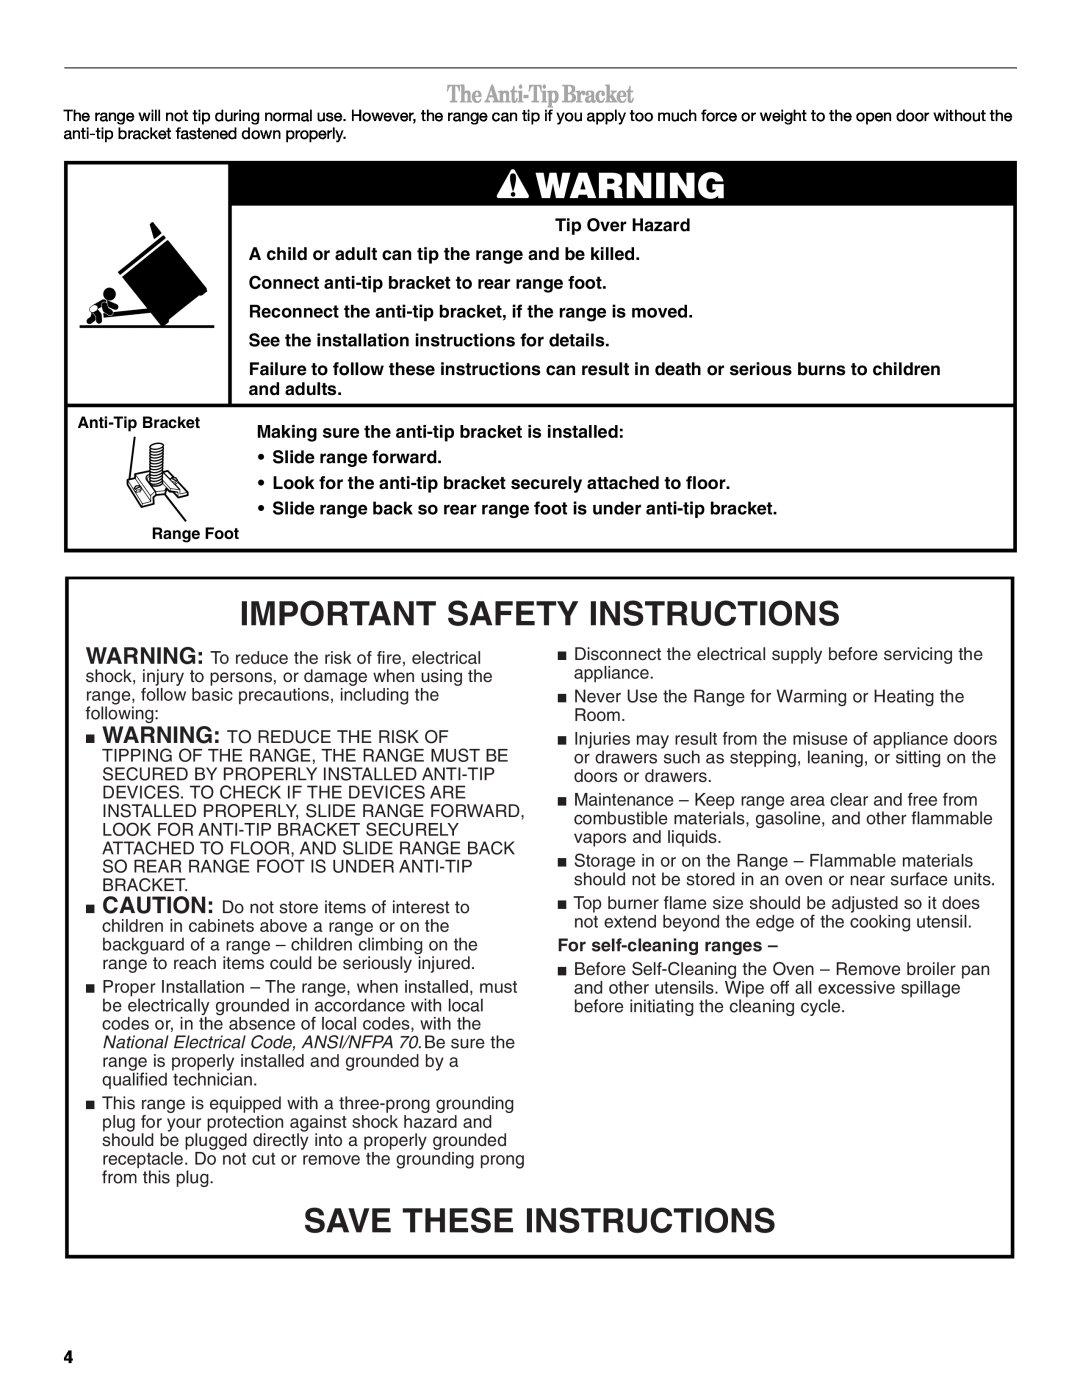 Whirlpool 98017488 Important Safety Instructions, Save These Instructions, The Anti-Tip Bracket, For self-cleaning ranges 